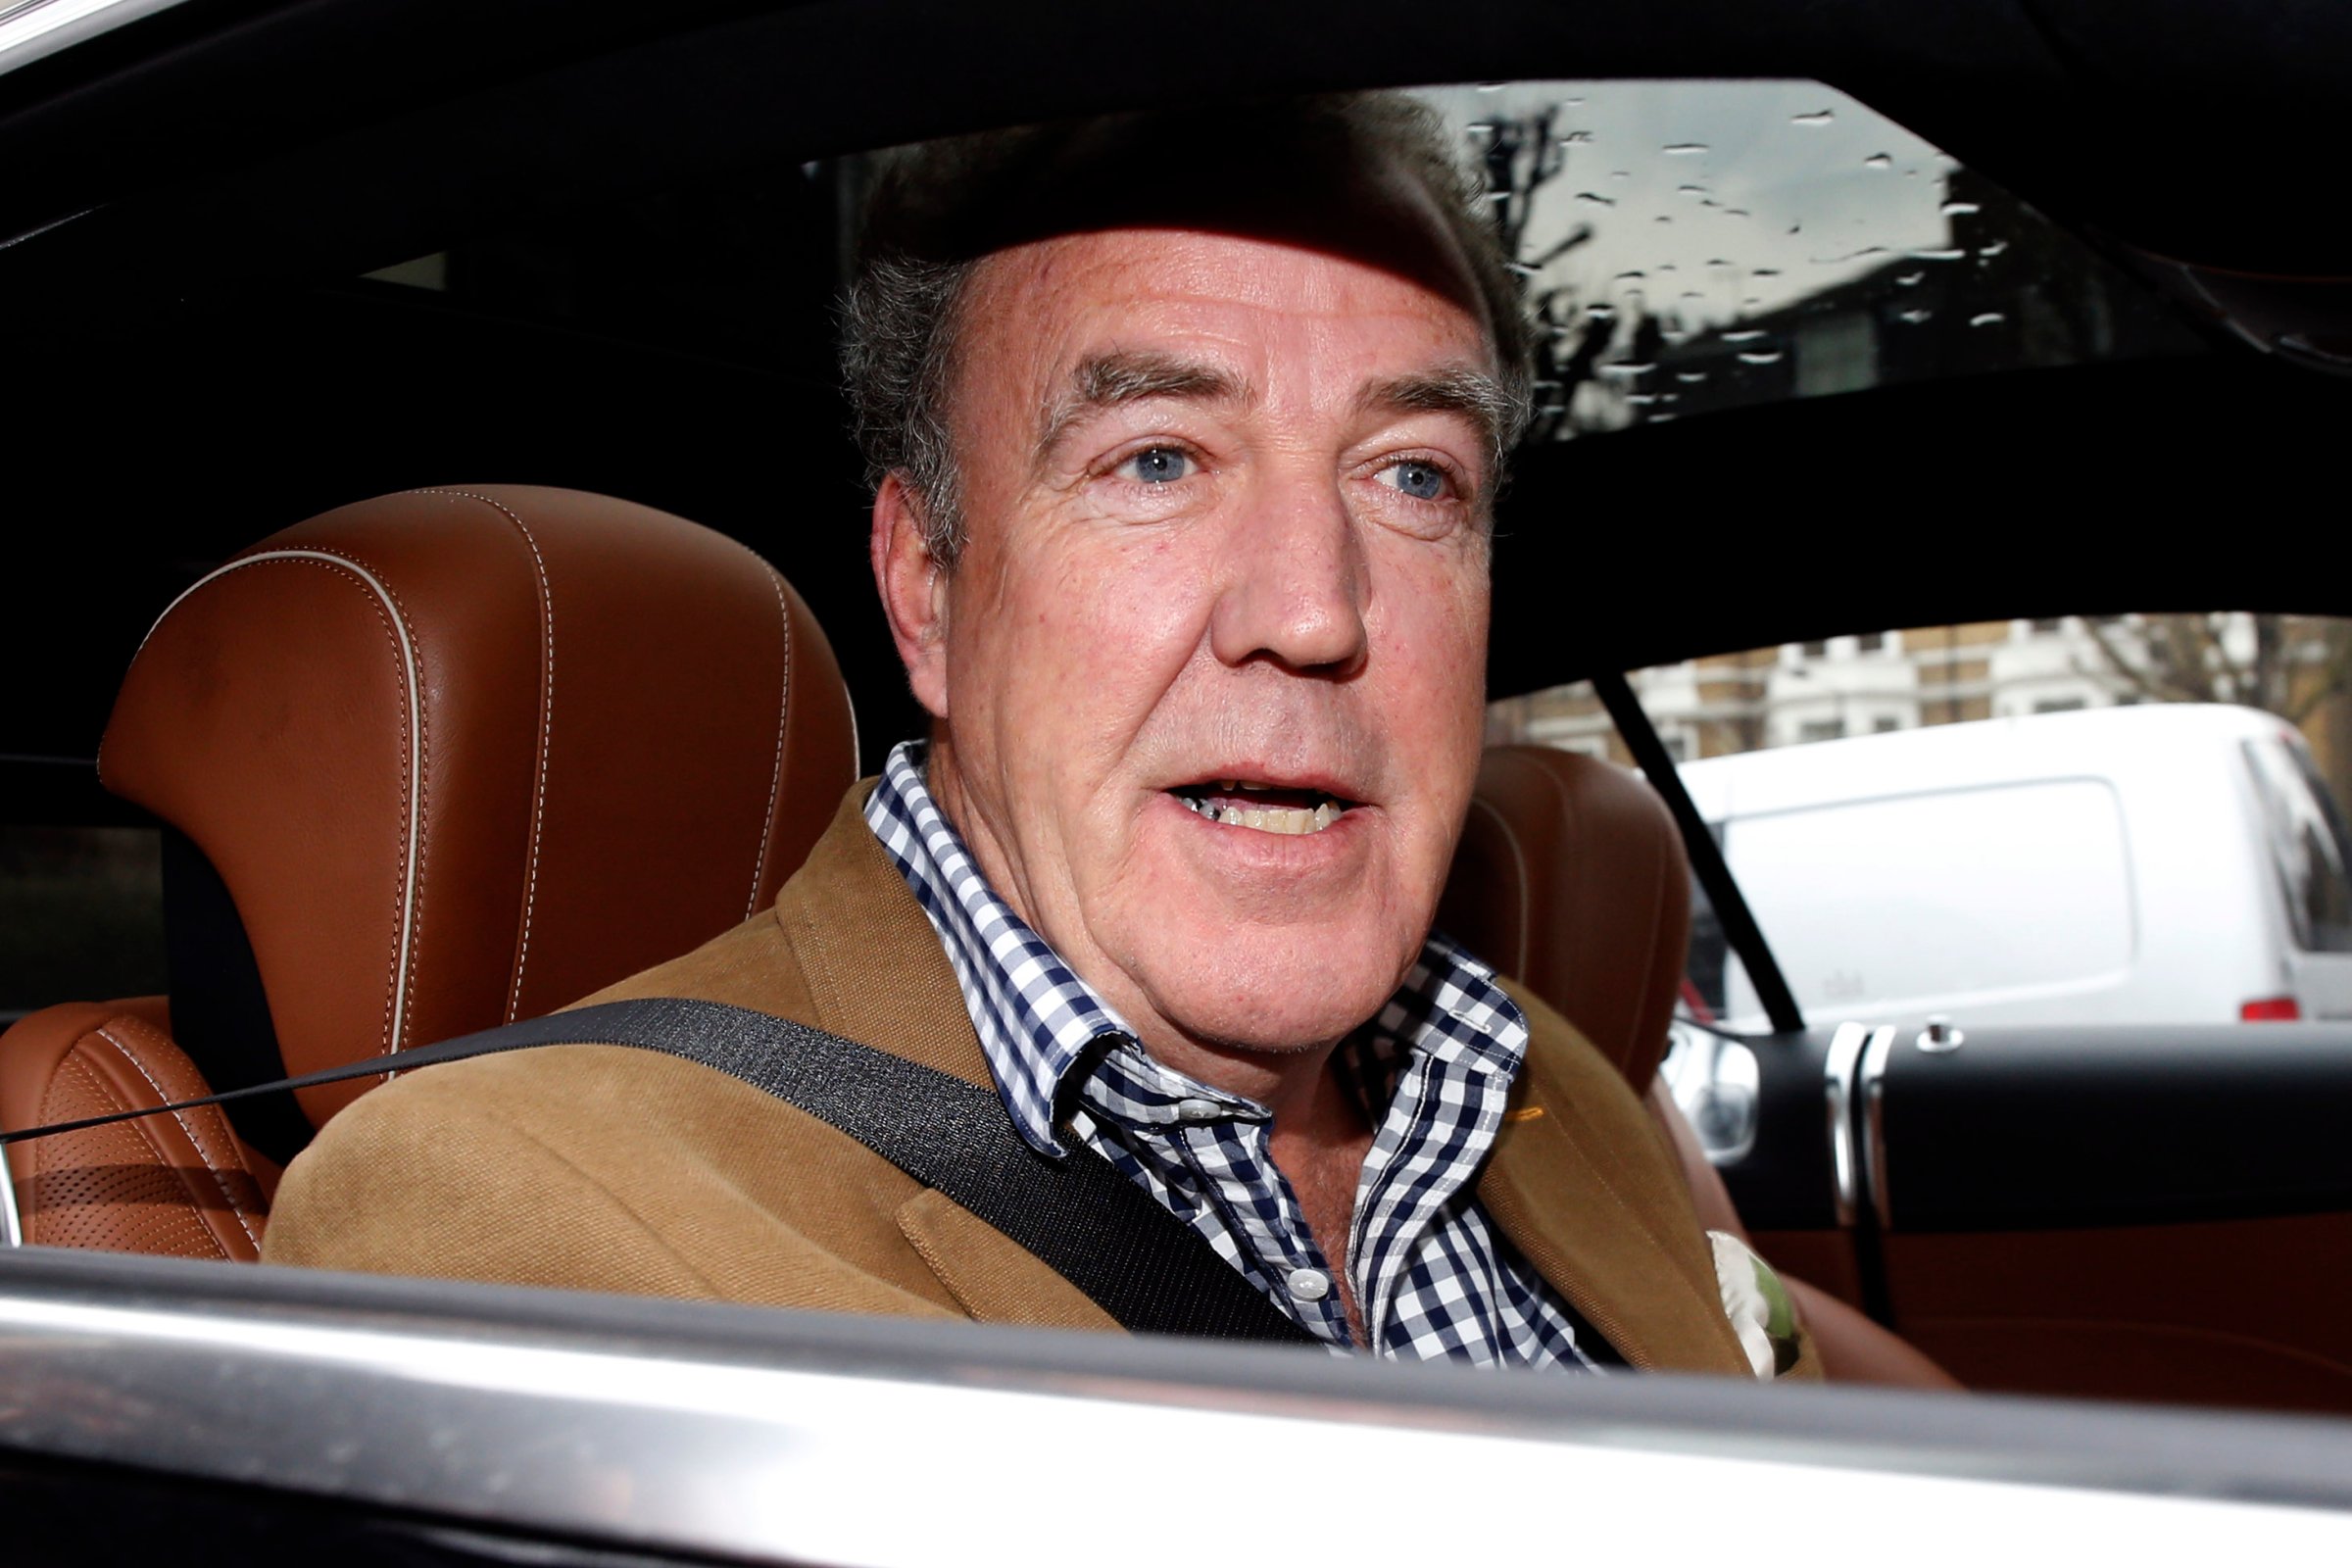 Jeremy Clarkson seen leaving his West London home on March 16, 2015 in London, England.